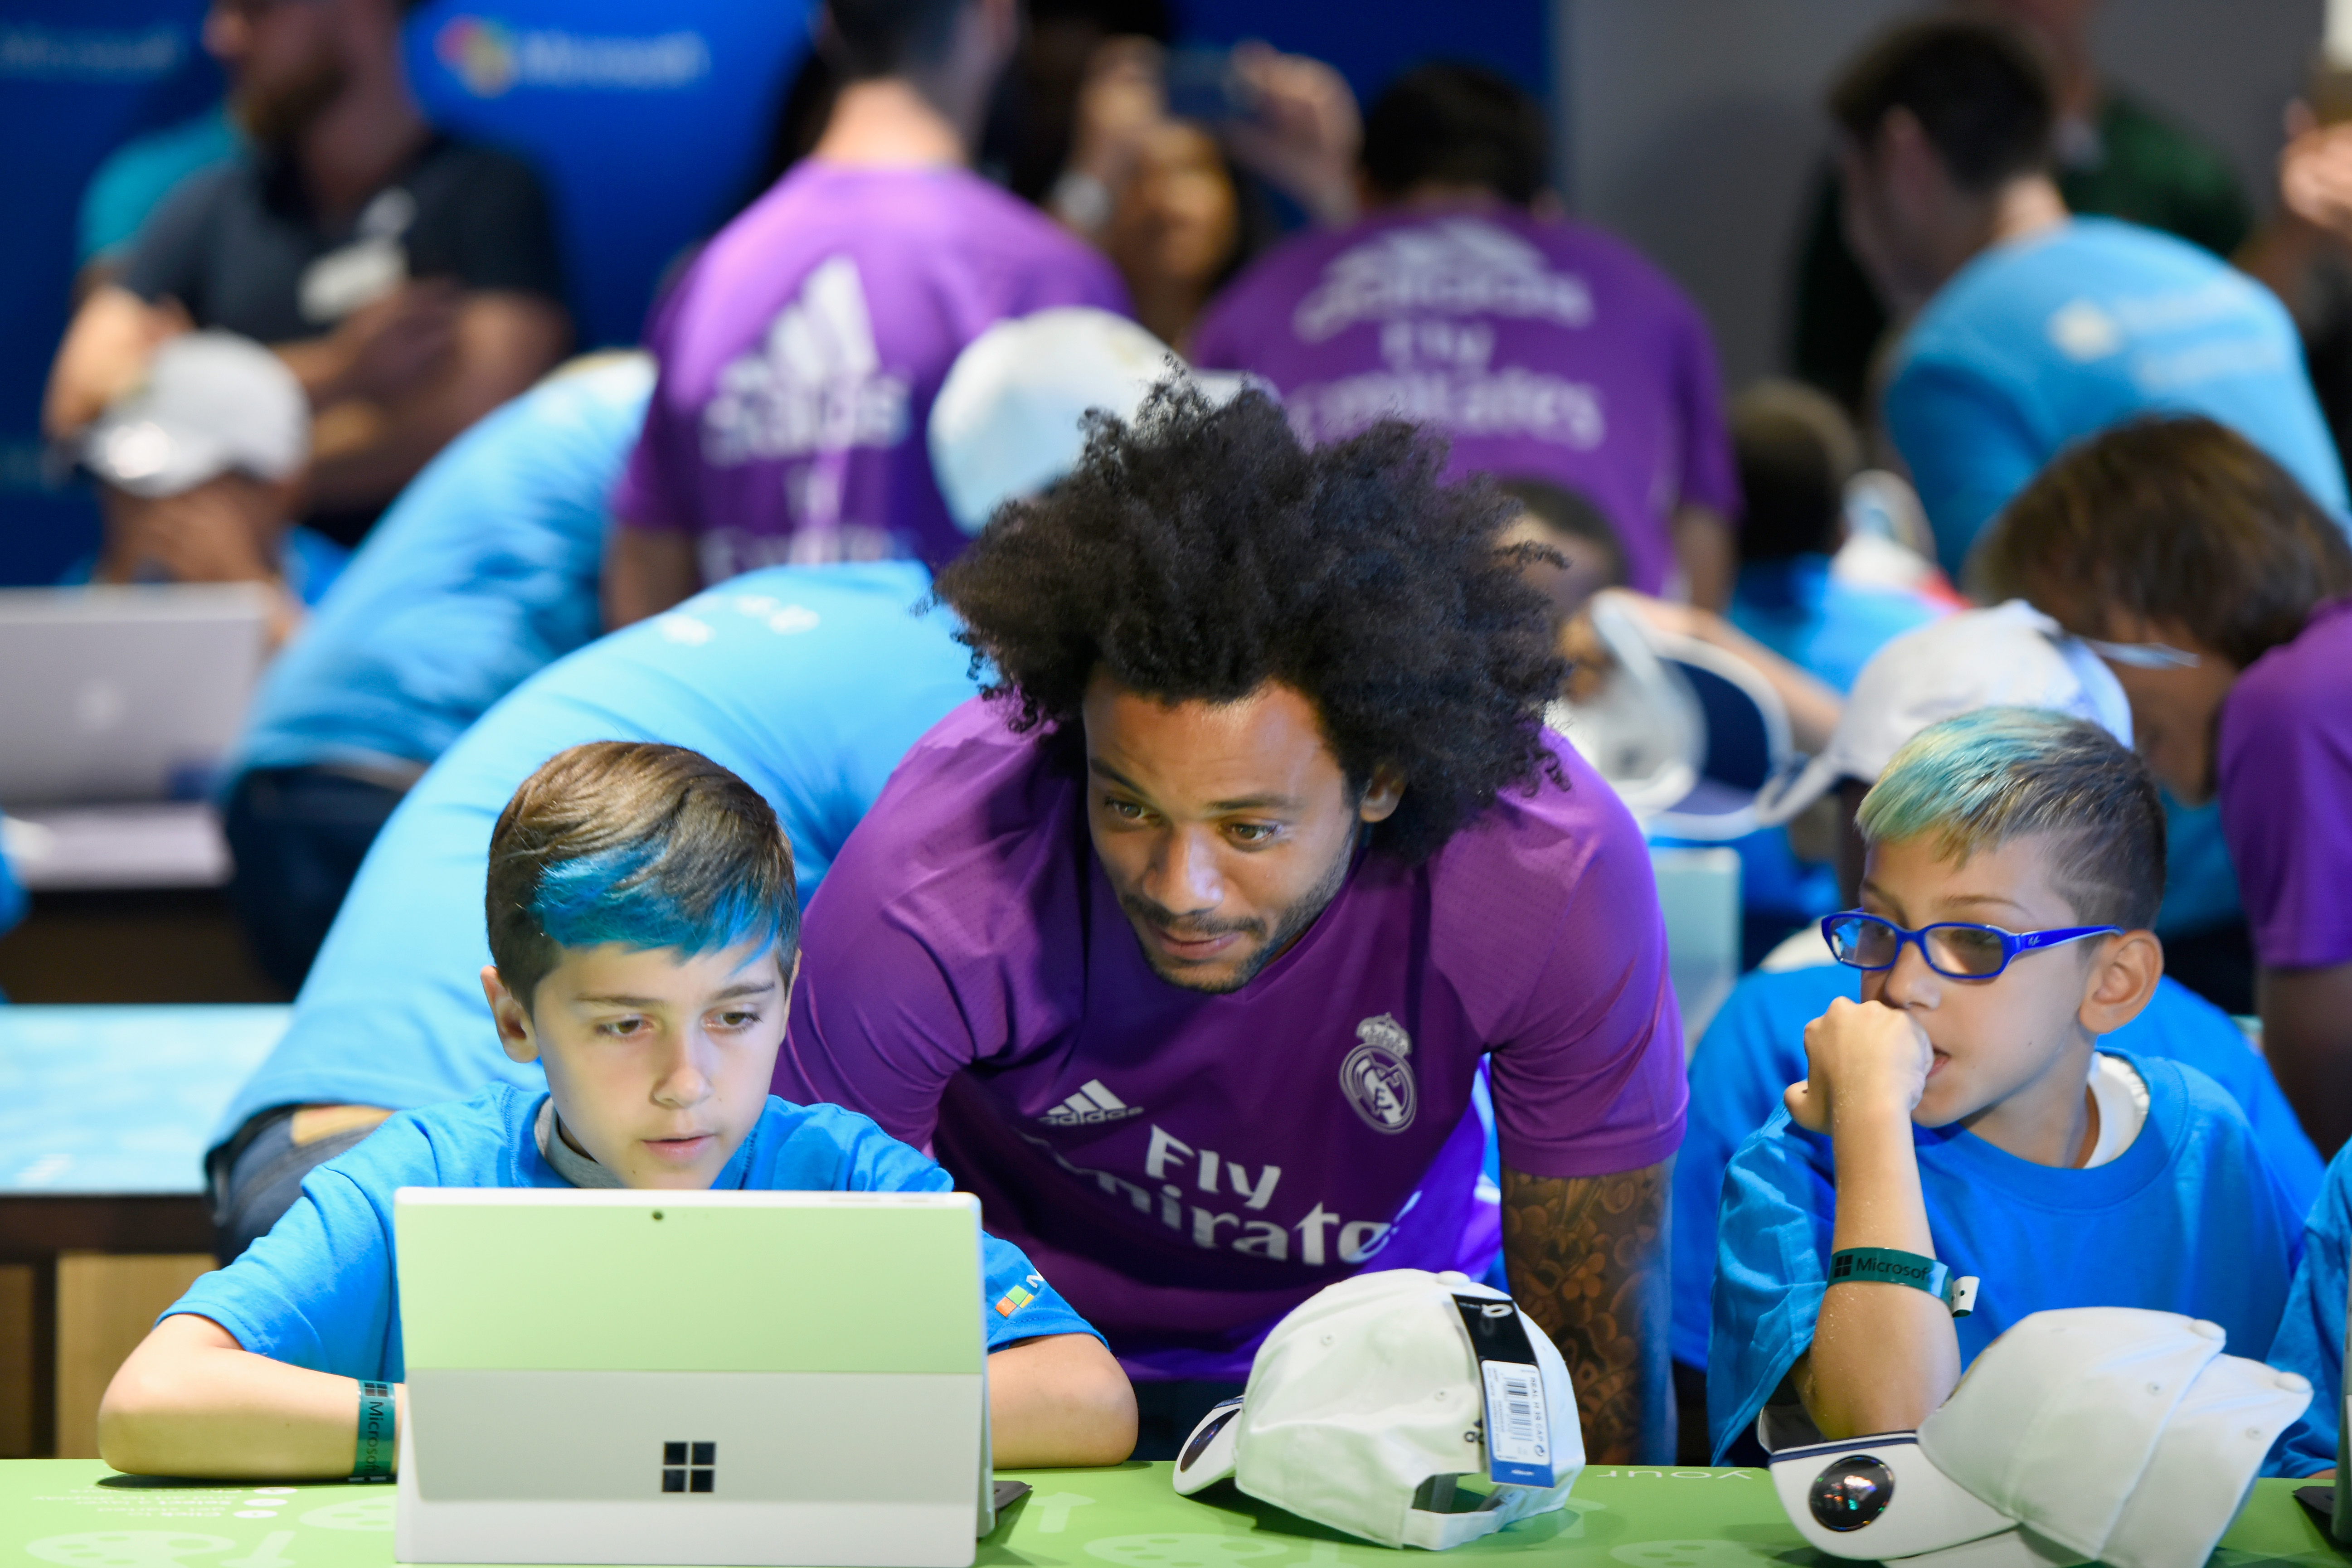 Real Madrid Surprises Fans at the Microsoft Store in New York City